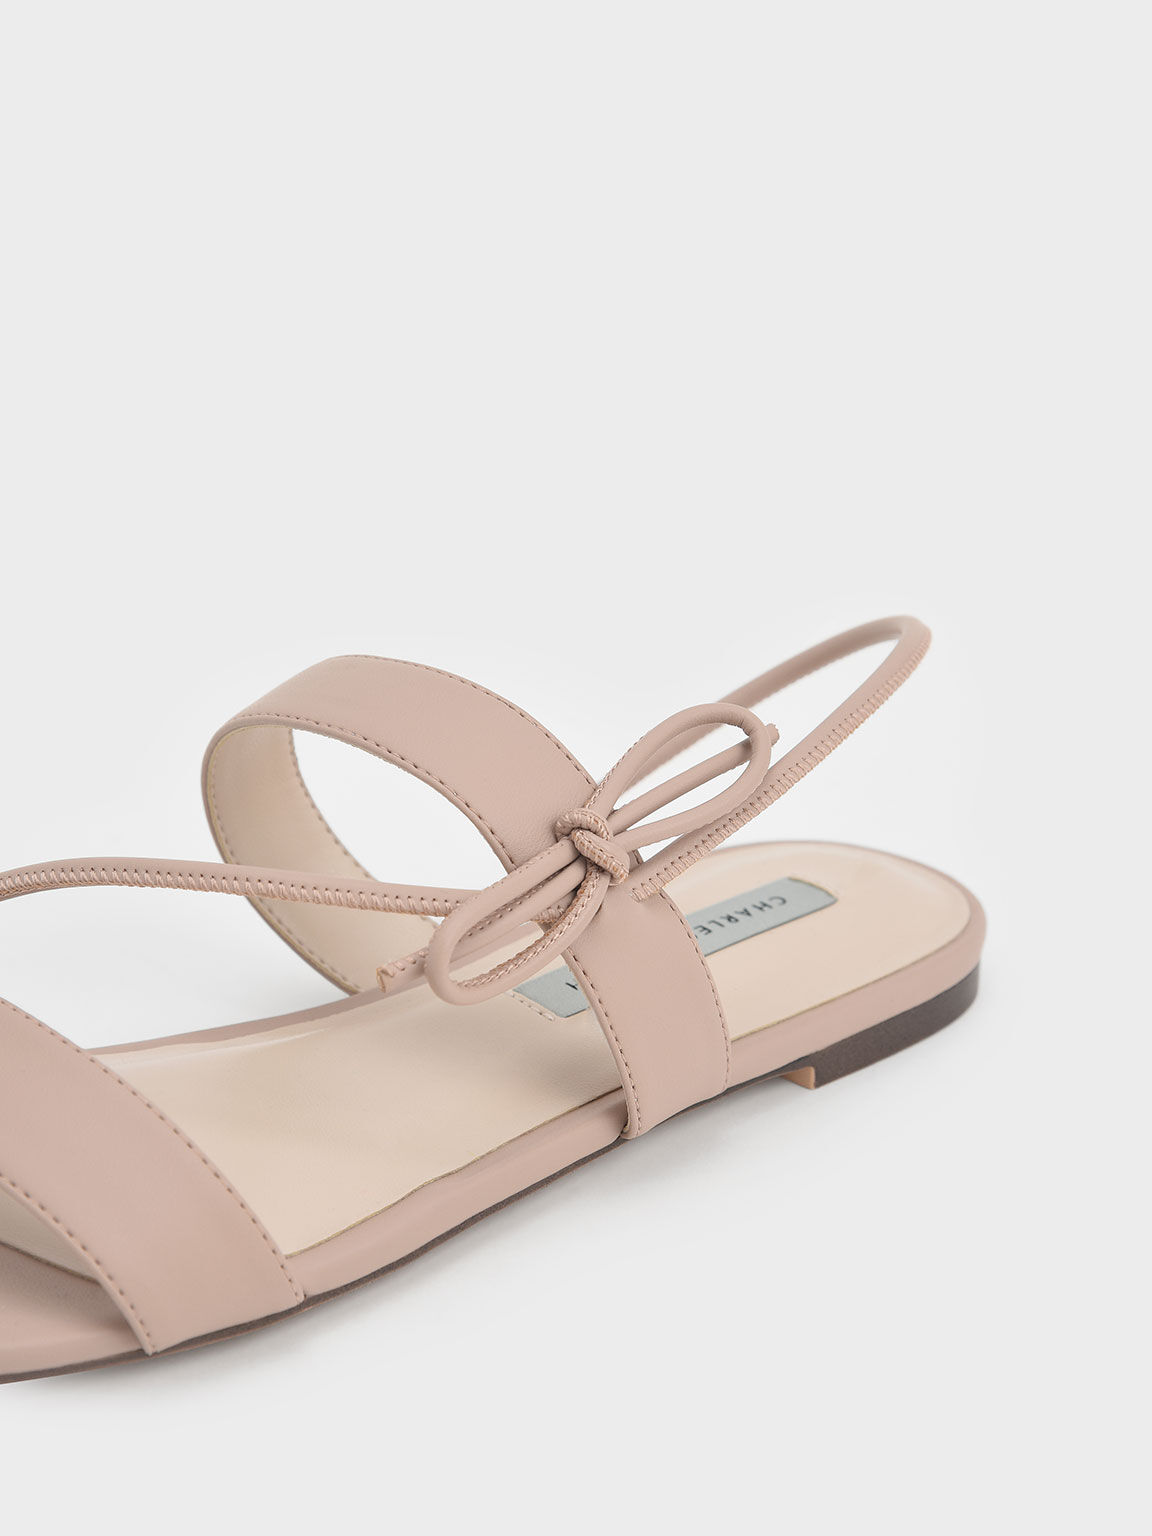 Nude Textured Bow-Tie Flat Slingback Sandals - CHARLES & KEITH ID